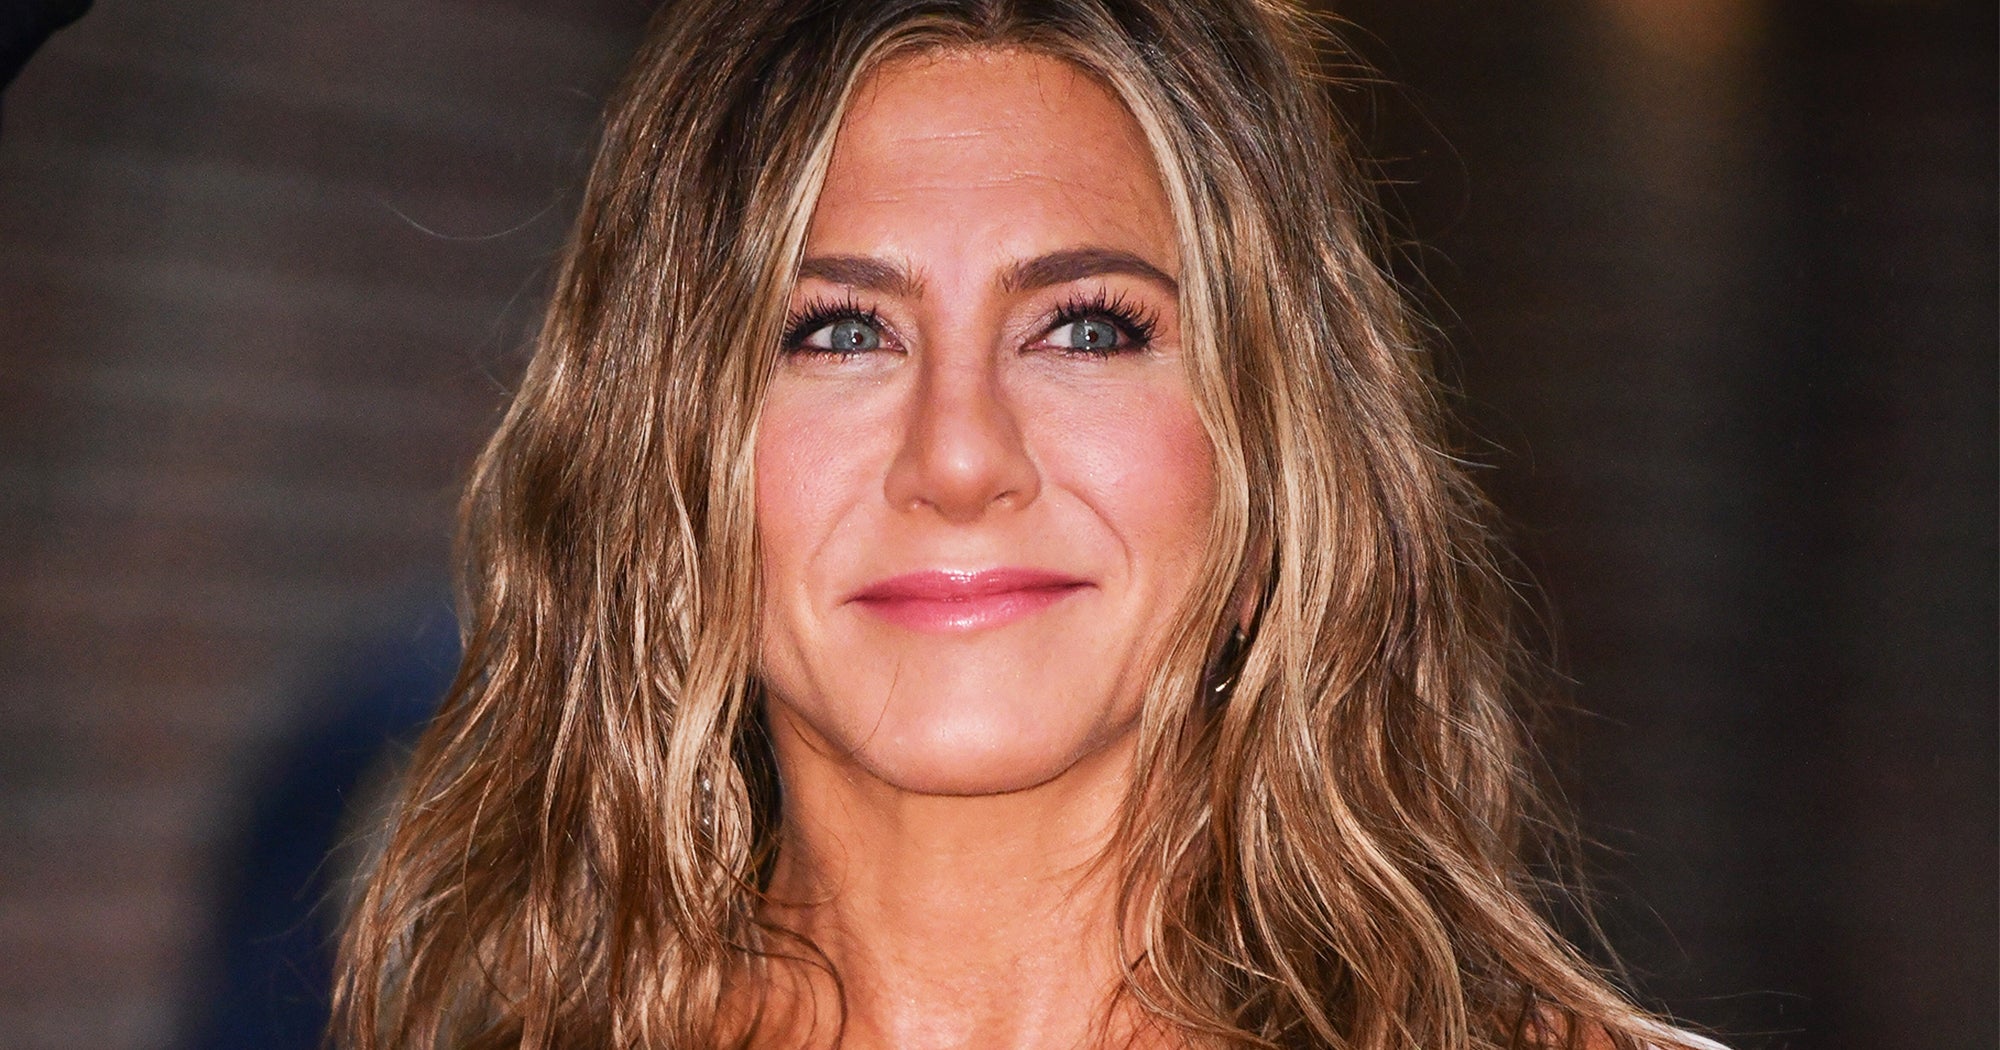 Jennifer Aniston’s Wavy Hair Routine Includes A Secret Product - Refinery29